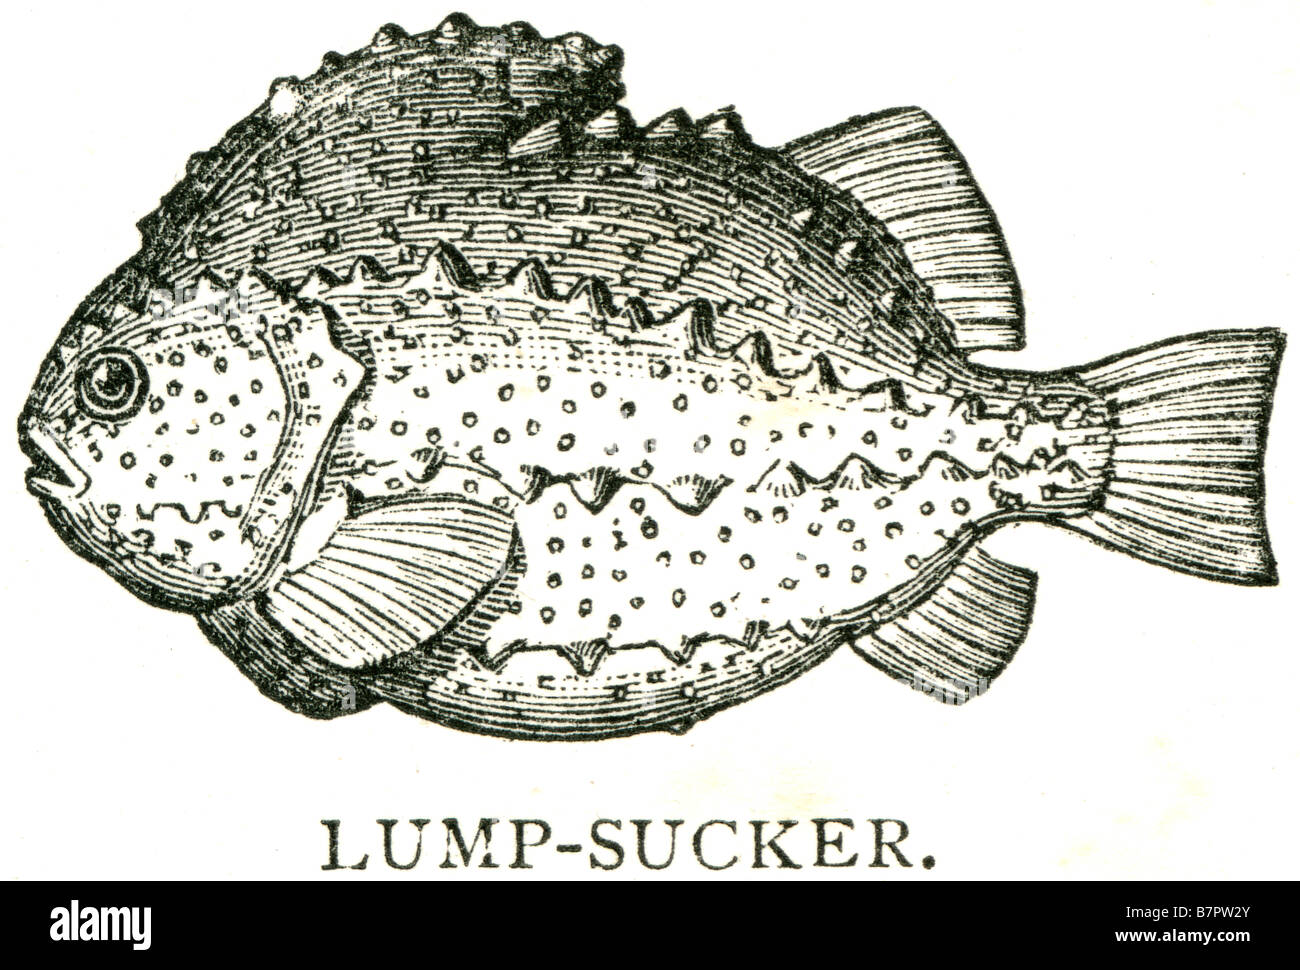 lump sucker Lumpsuckers or lumpfish are mostly small scorpaeniform marine fish of the family Cyclopteridae. They are found in th Stock Photo